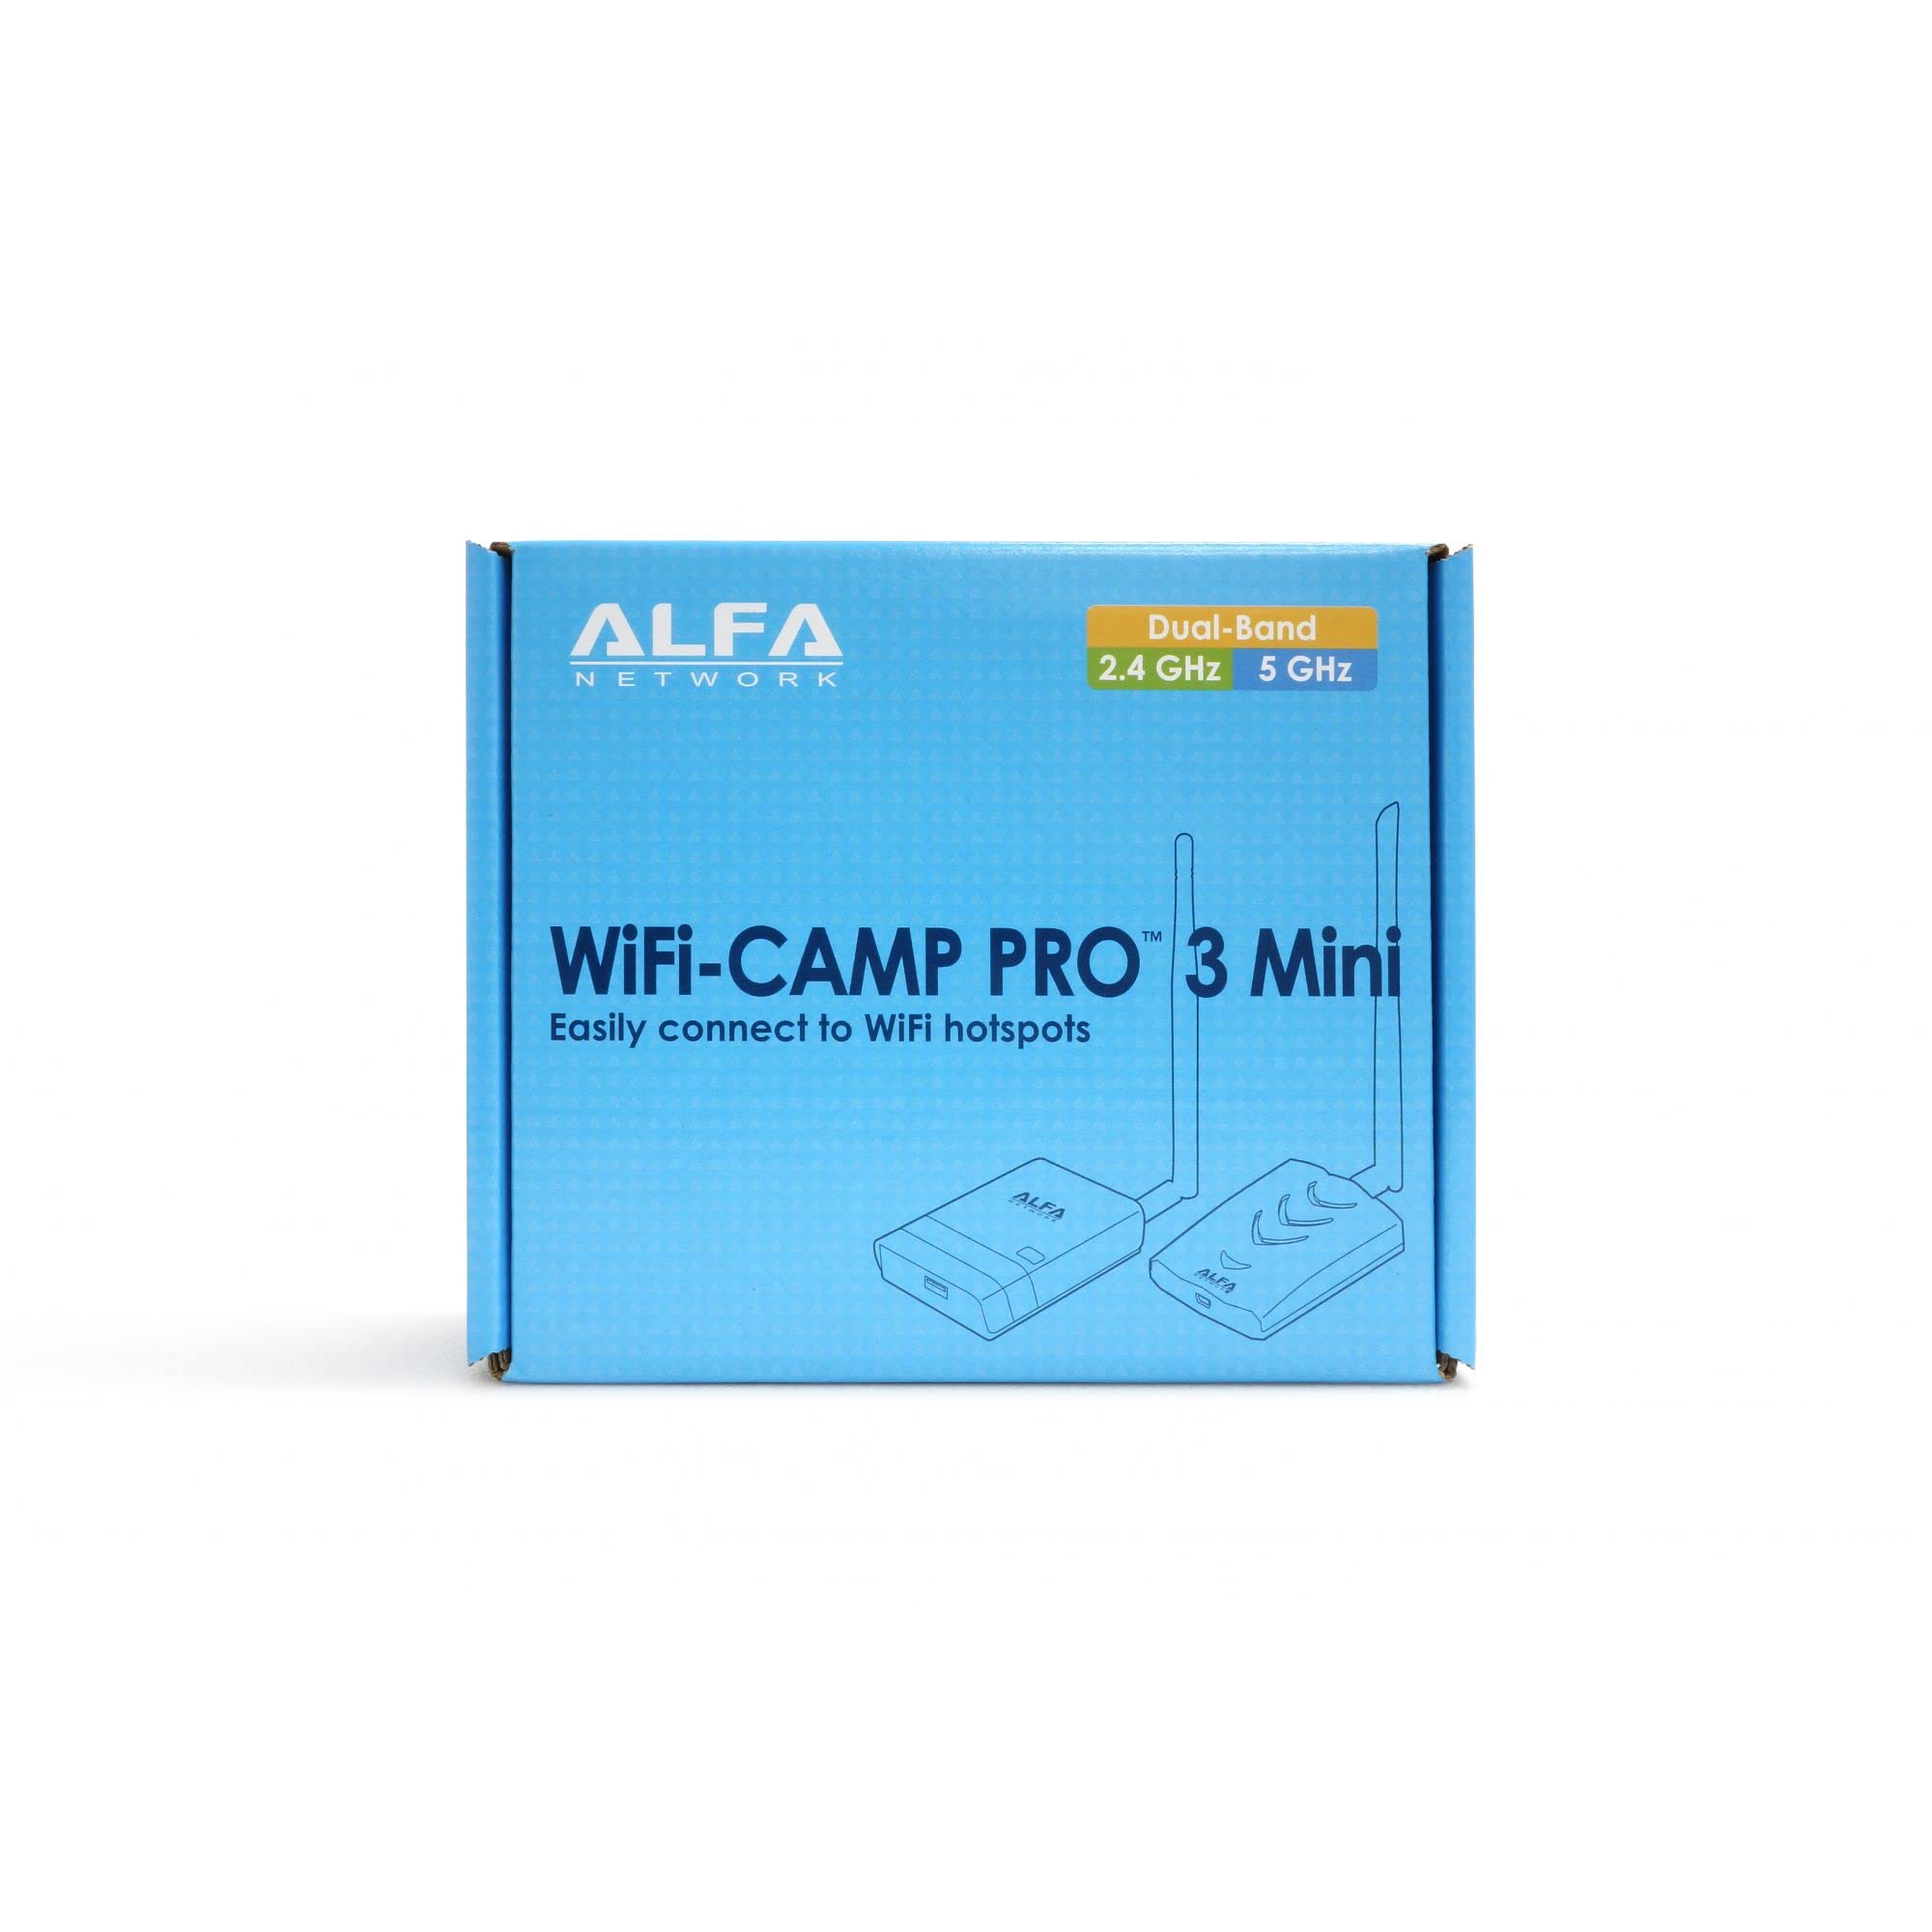 ALFA WiFi Camp Pro 3 Mini 2.4 + 5 Ghz Dual Band WiFi Extender Repeater for Airstream, RV, Out Building